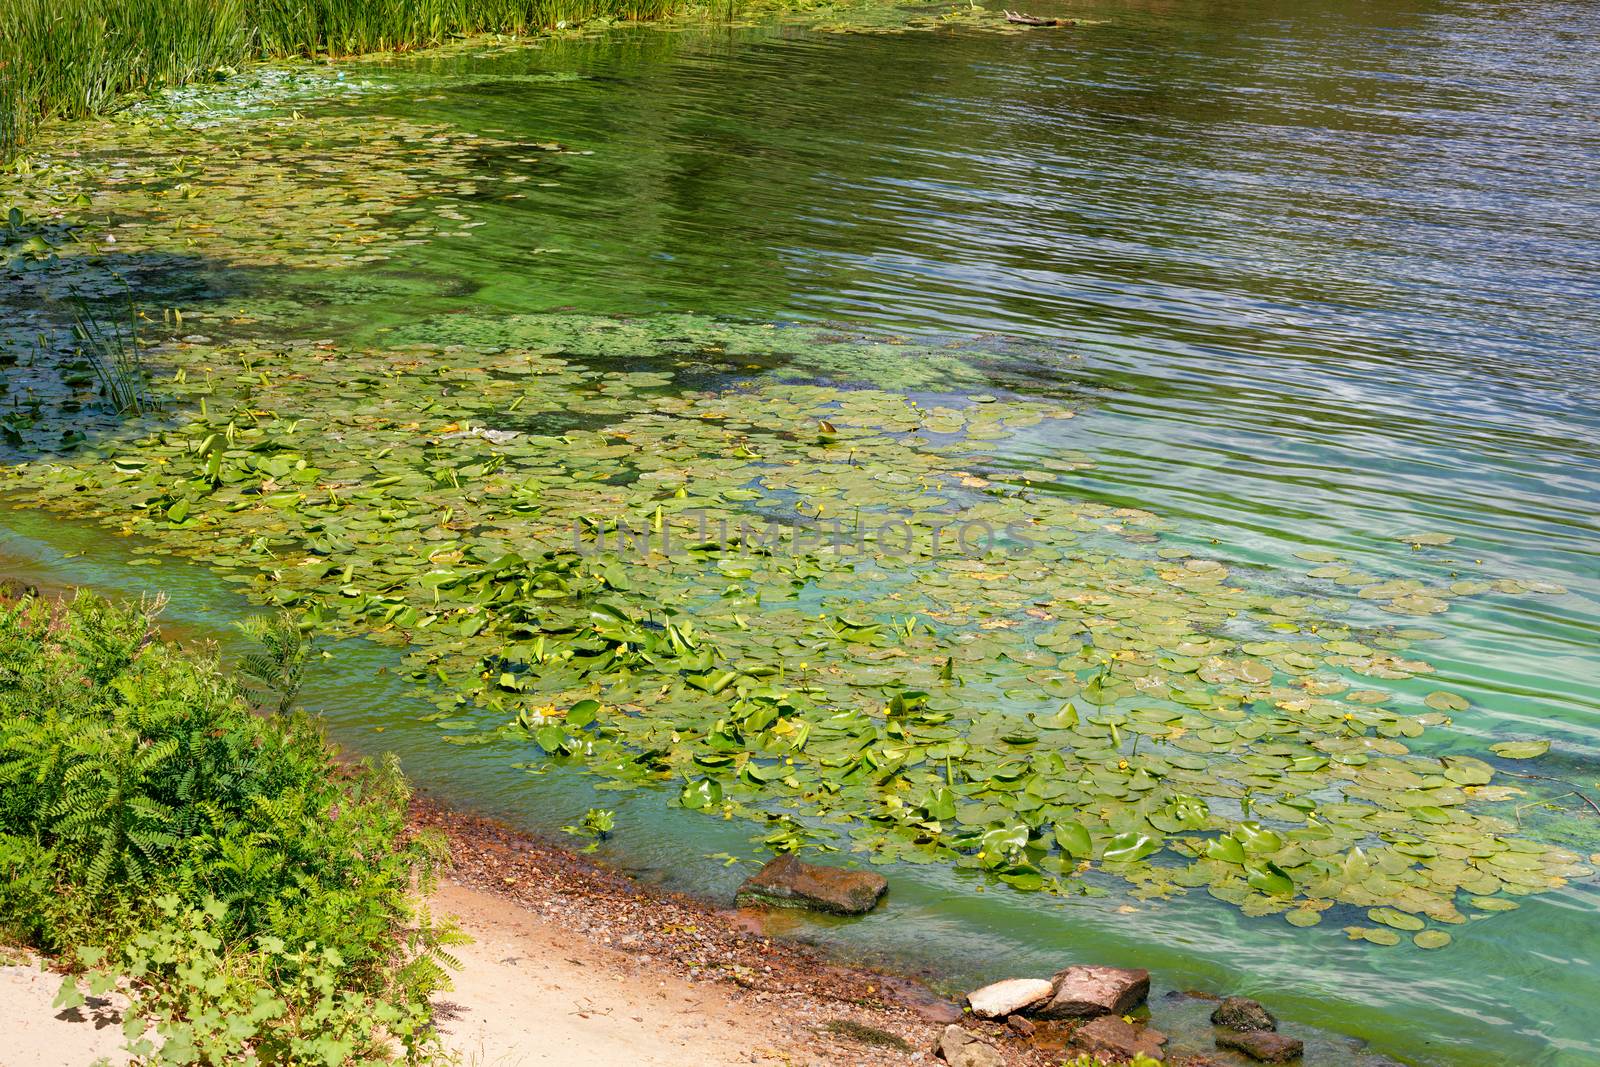 Water yellow lilies have occupied the coastal waters of the river. Green algae carp the surface of the flowering water river along the shore.